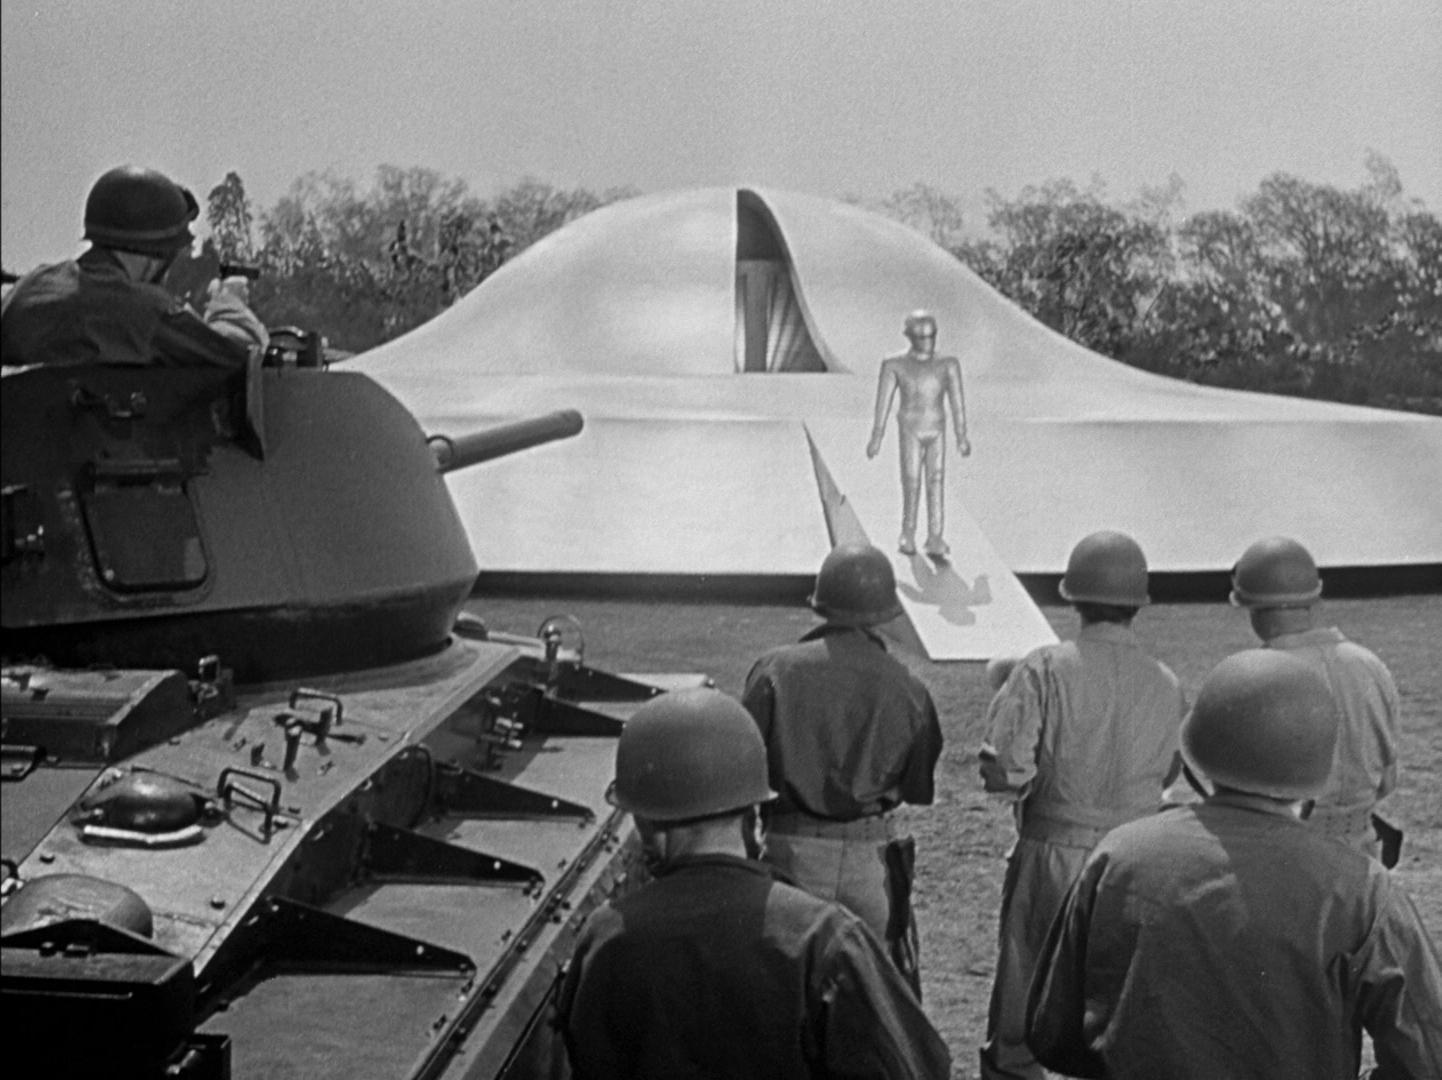 climactic scene from the 1951 film 'The Day the Earth Stood Still'